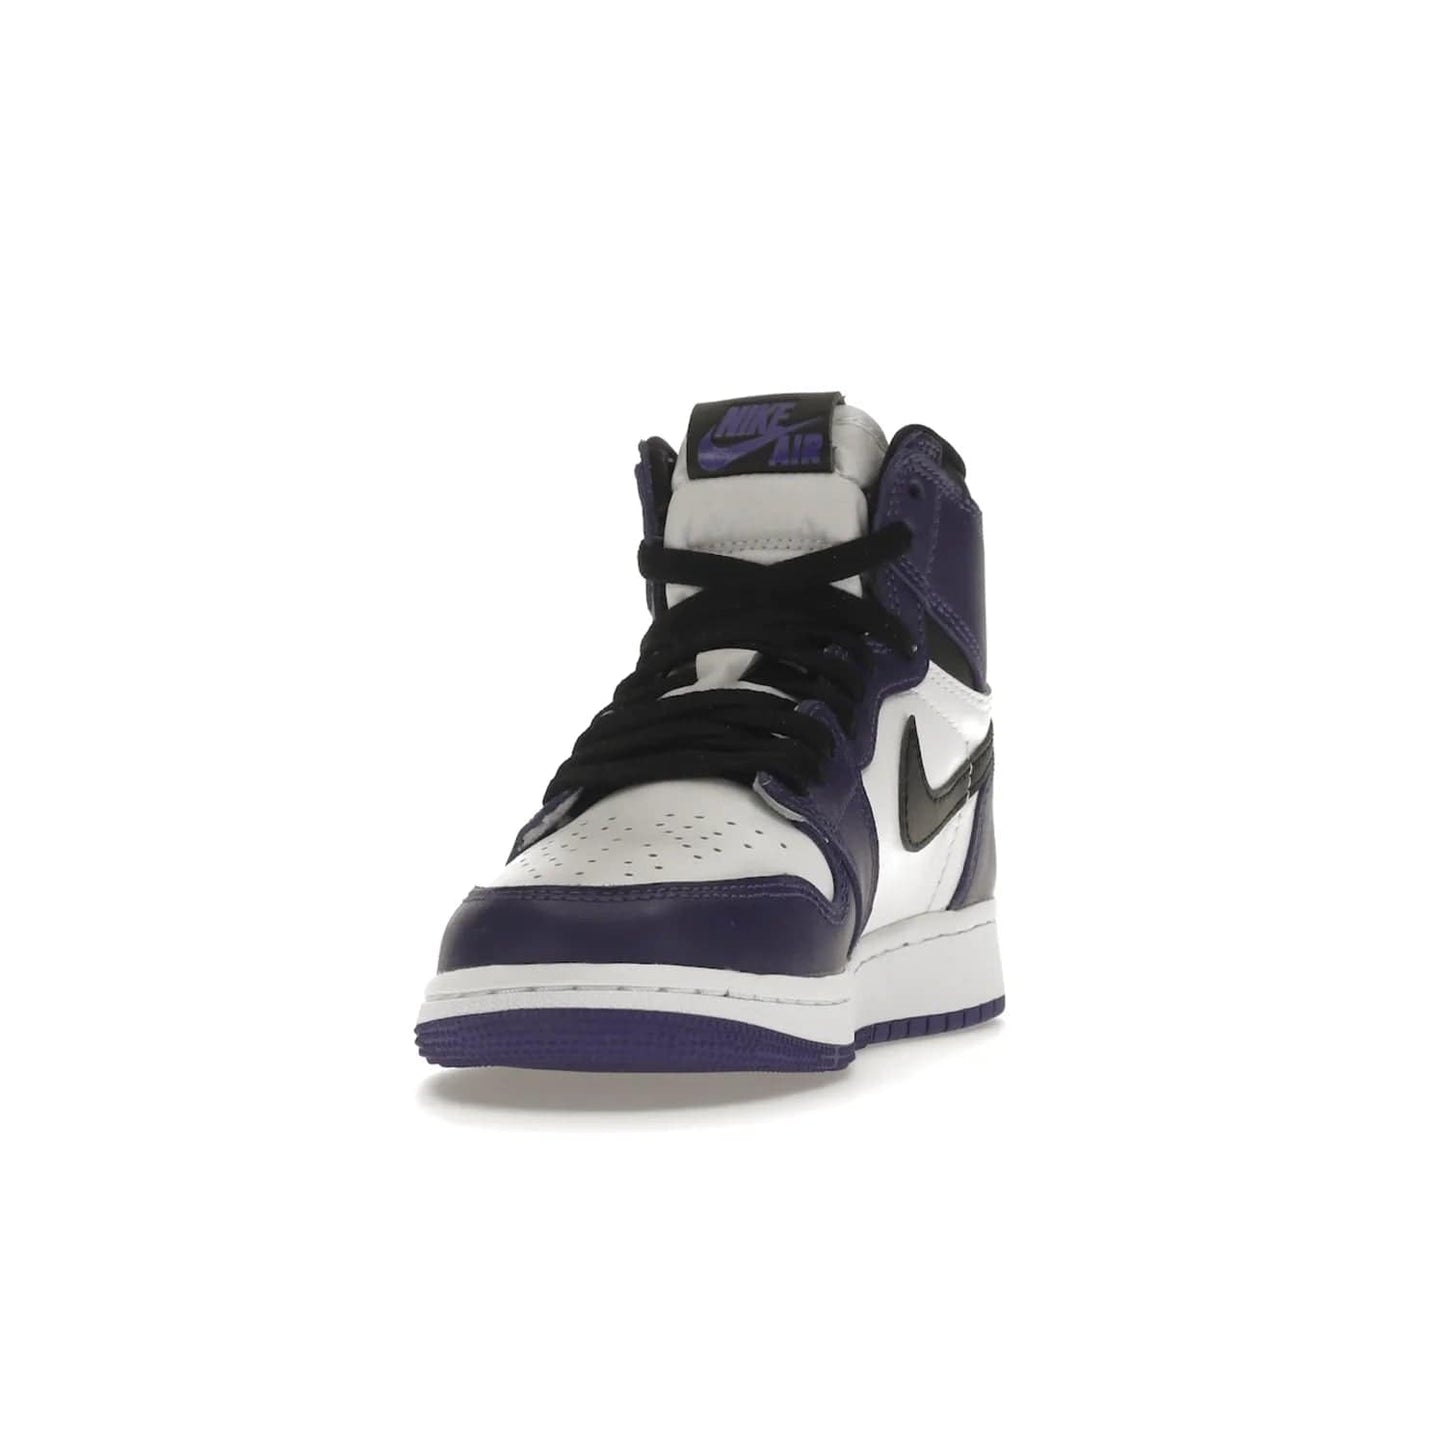 Jordan 1 Retro High Court Purple White (GS) - Image 12 - Only at www.BallersClubKickz.com - The Air Jordan 1 Retro High Court Purple is here and young sneaker heads can show off classic style. Features a white tumbled leather upper, black swoosh, purple overlays, black collar with purple overlay, white tongue, black patch with purple Nike Air logo and swoosh, white midsole, and purple rubber outsole with circular pattern.